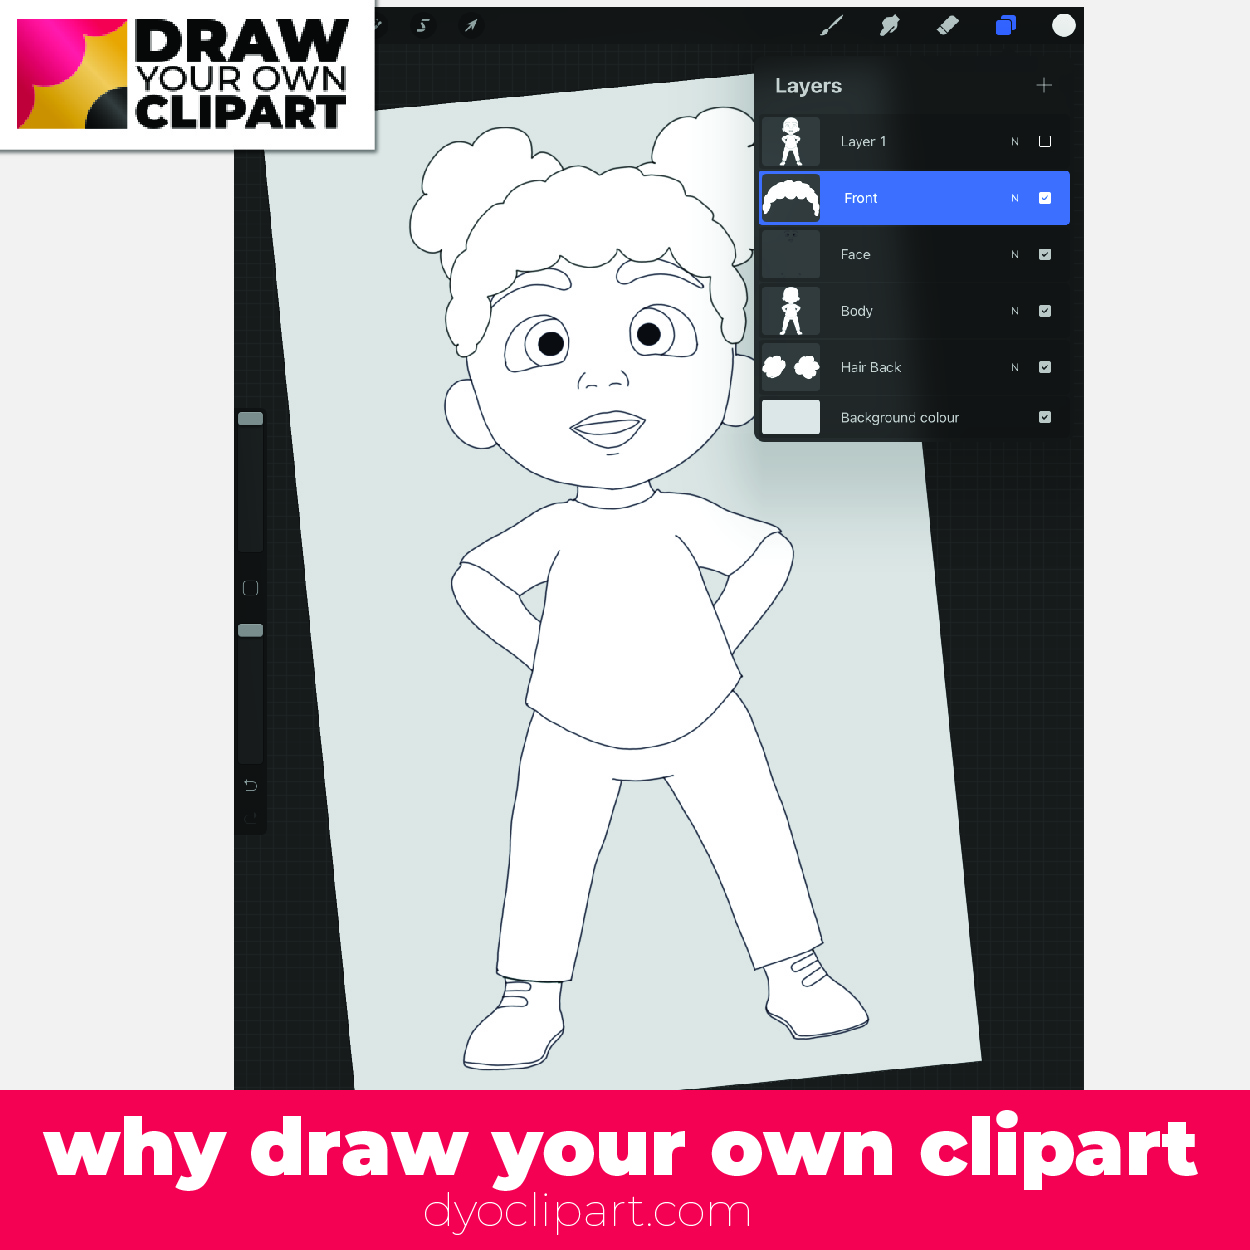 Why Draw Your Own Clipart? – DYO Clipart